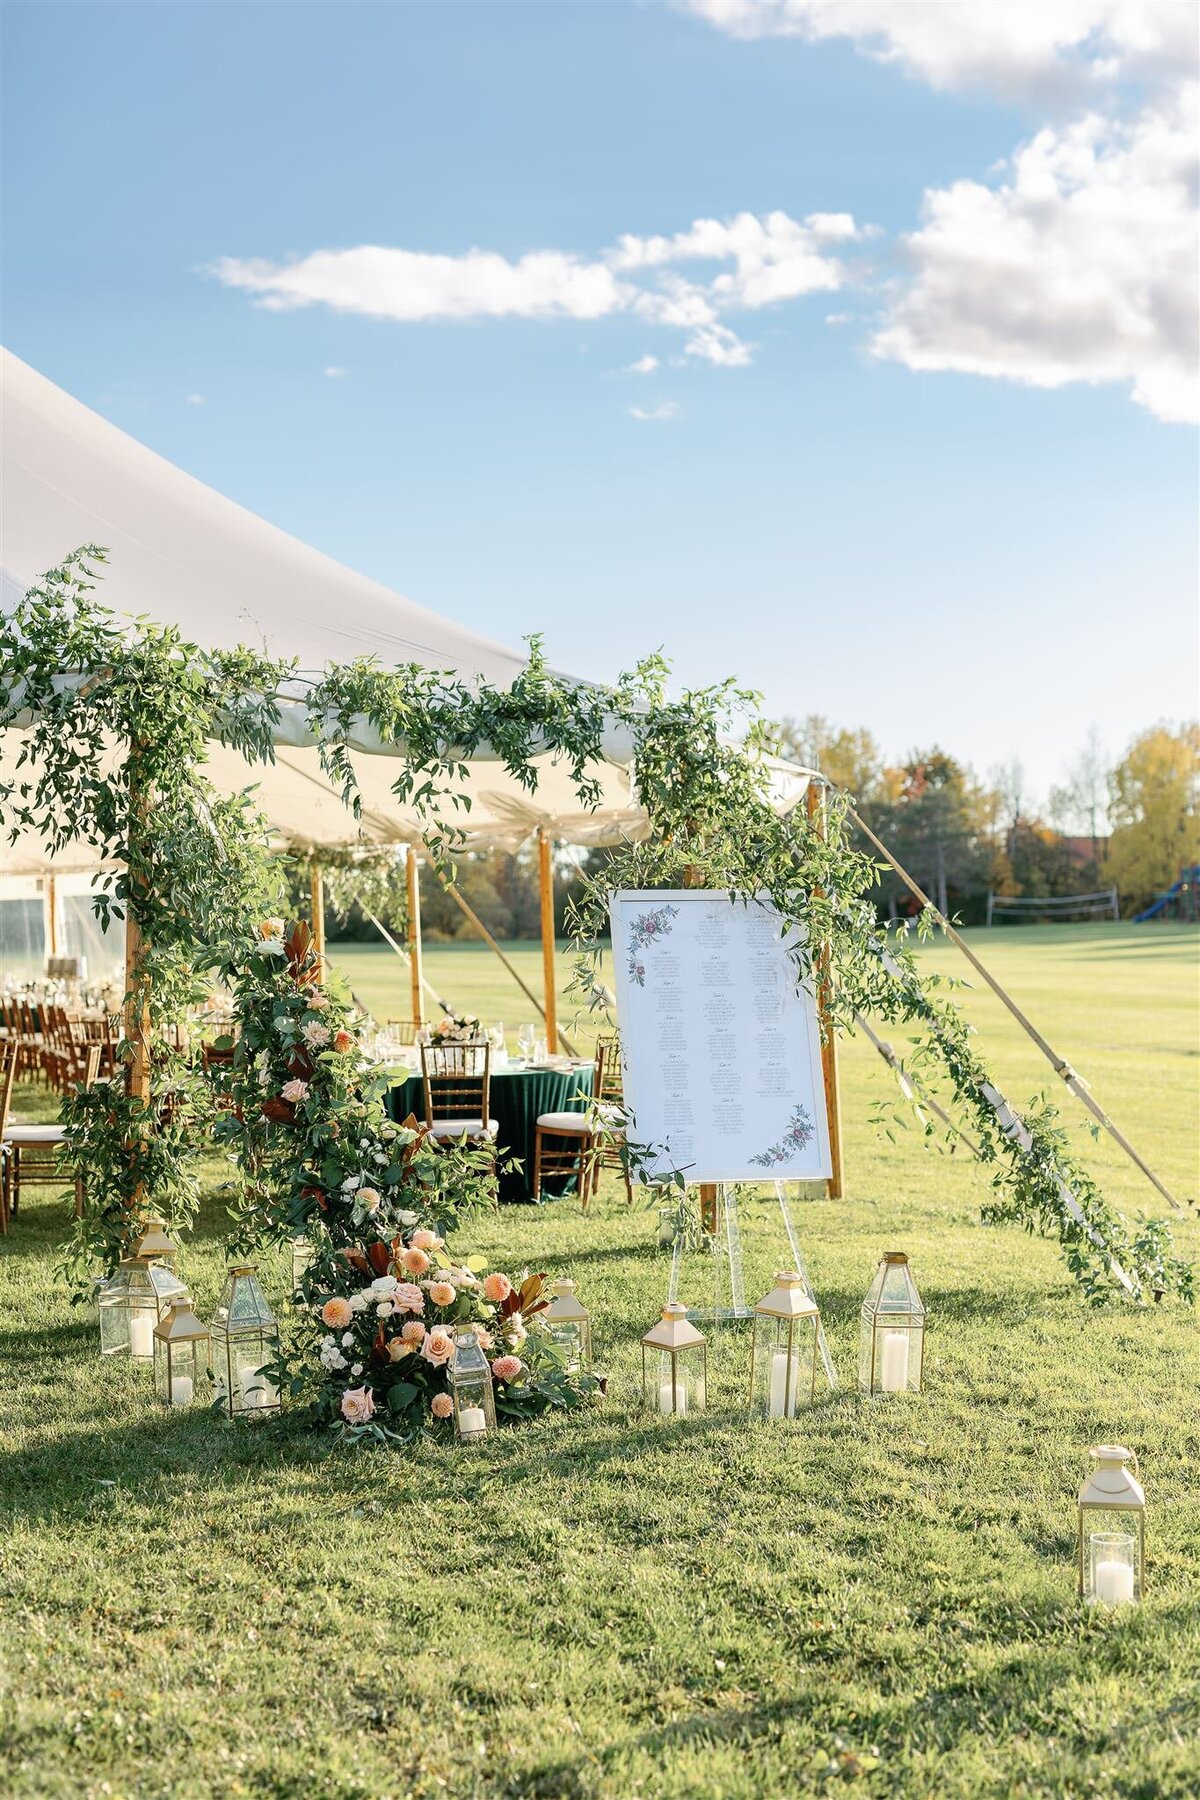 An image of a wedding tent at Basin Harbor decorated with florals